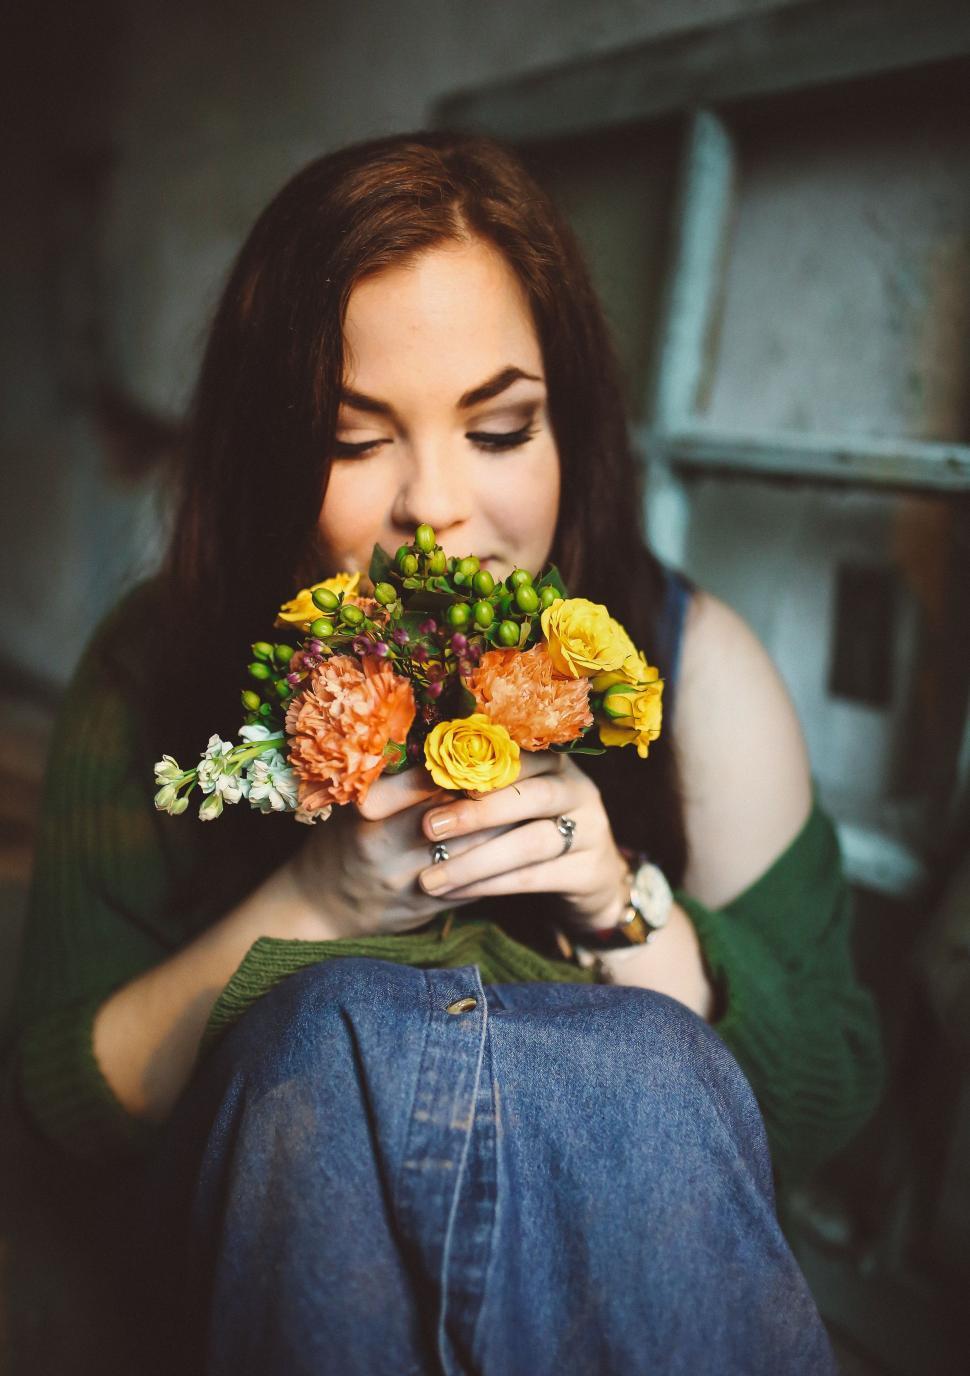 Free Image of Woman Sitting on Floor With Flowers 